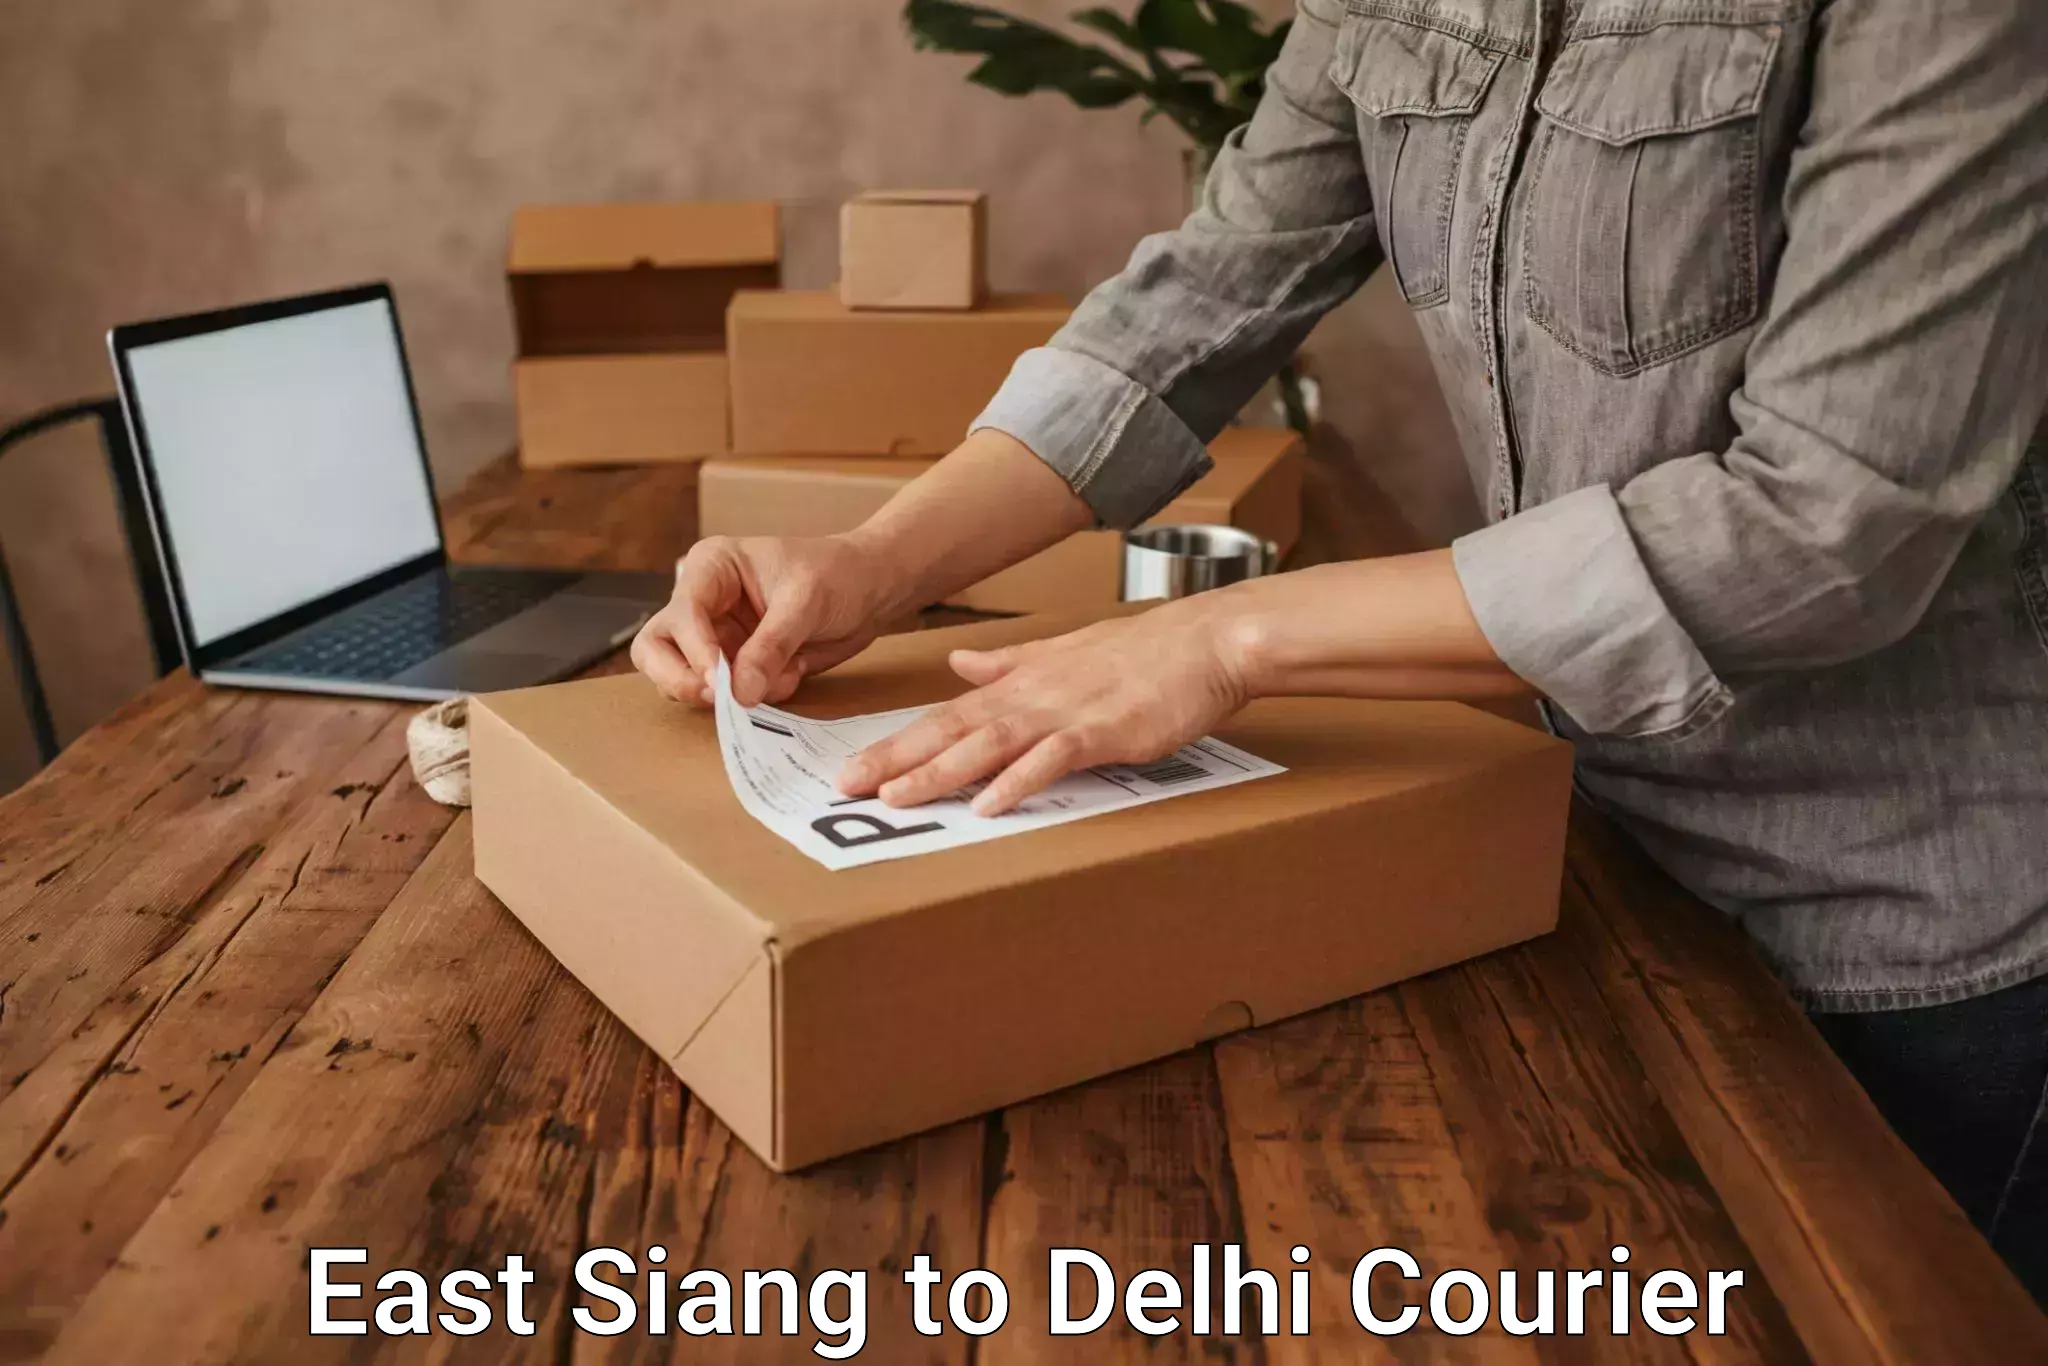 Lightweight parcel options East Siang to Delhi